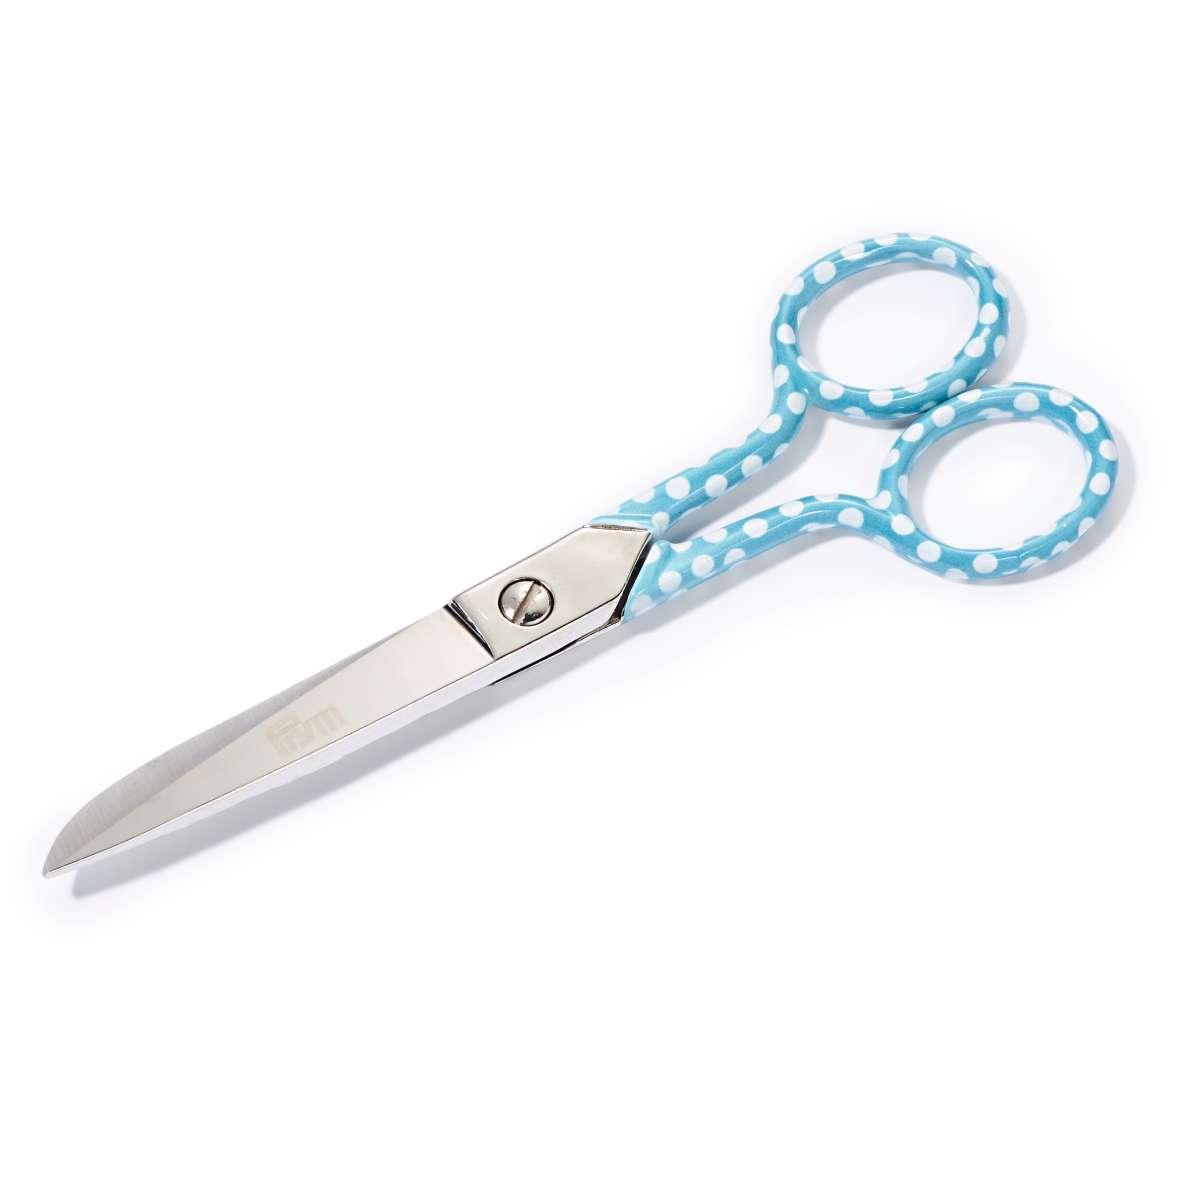 Intsun Electric Fabric Scissors with Rechargeable UK